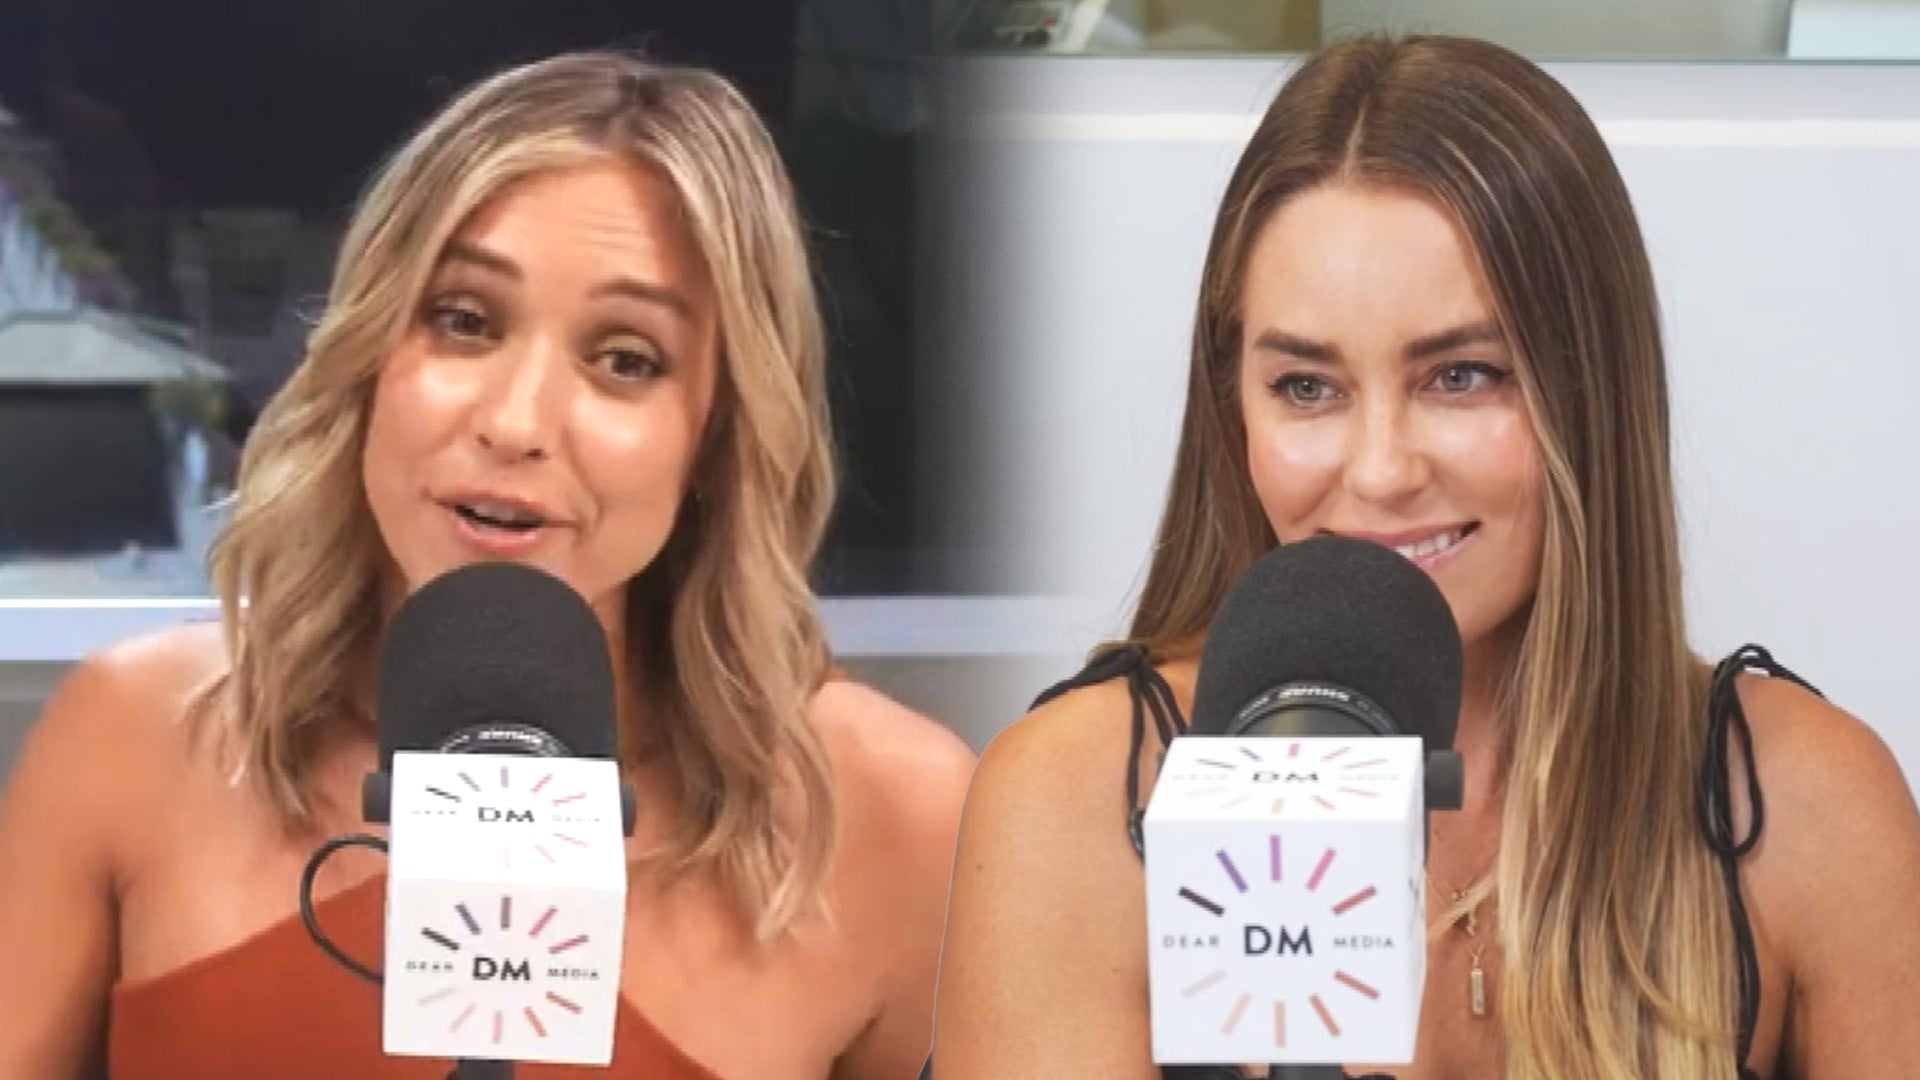 Lauren Conrad on 'Back to the Beach' Podcast: Biggest Revelations